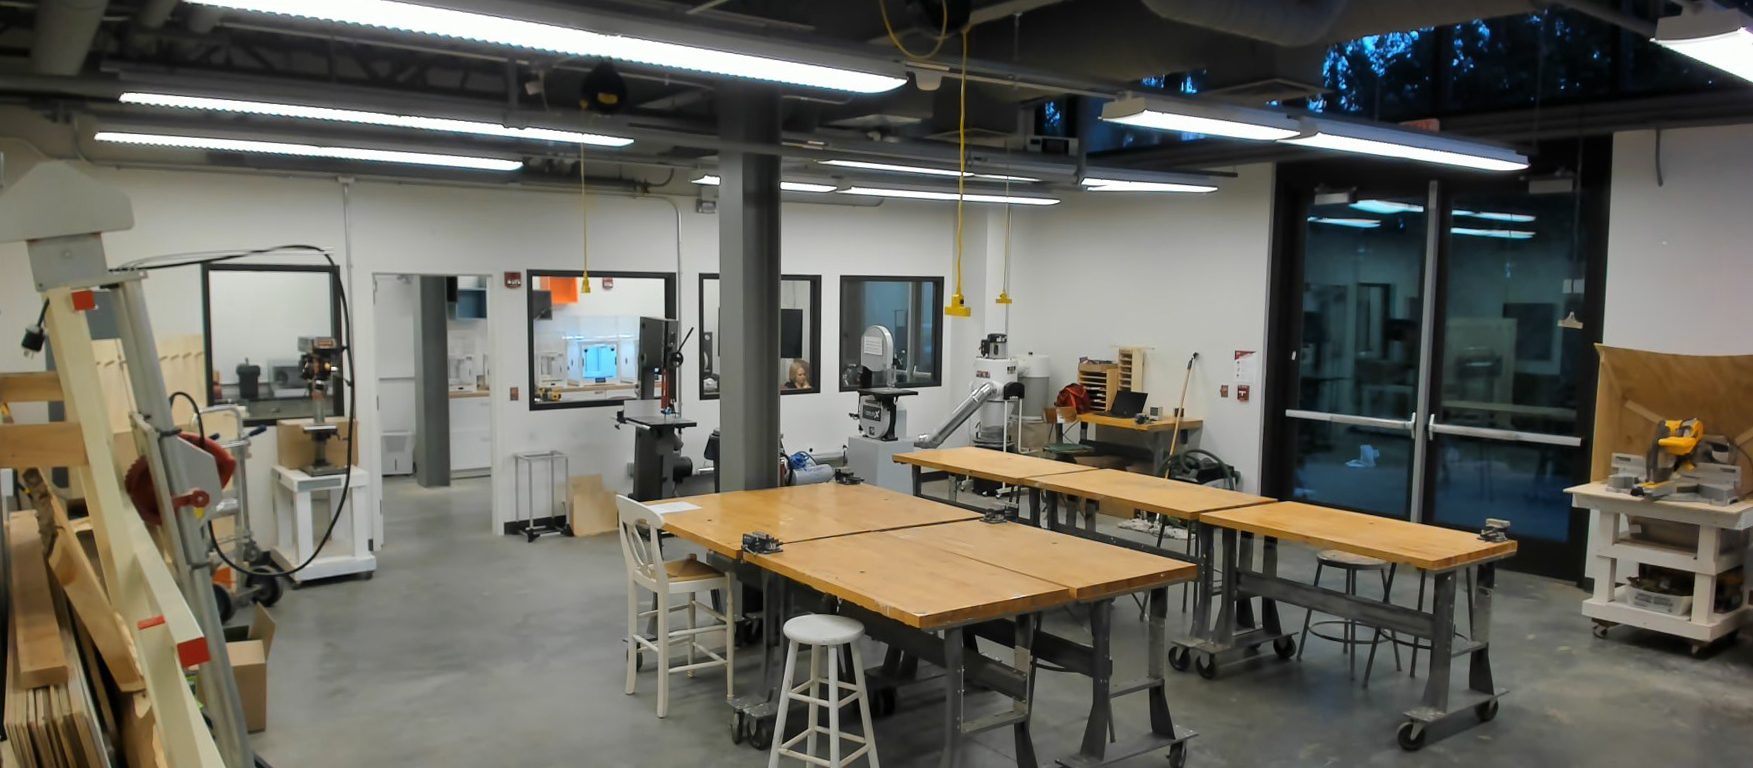 The MakerSpace interior with work tables and woodshop machines.